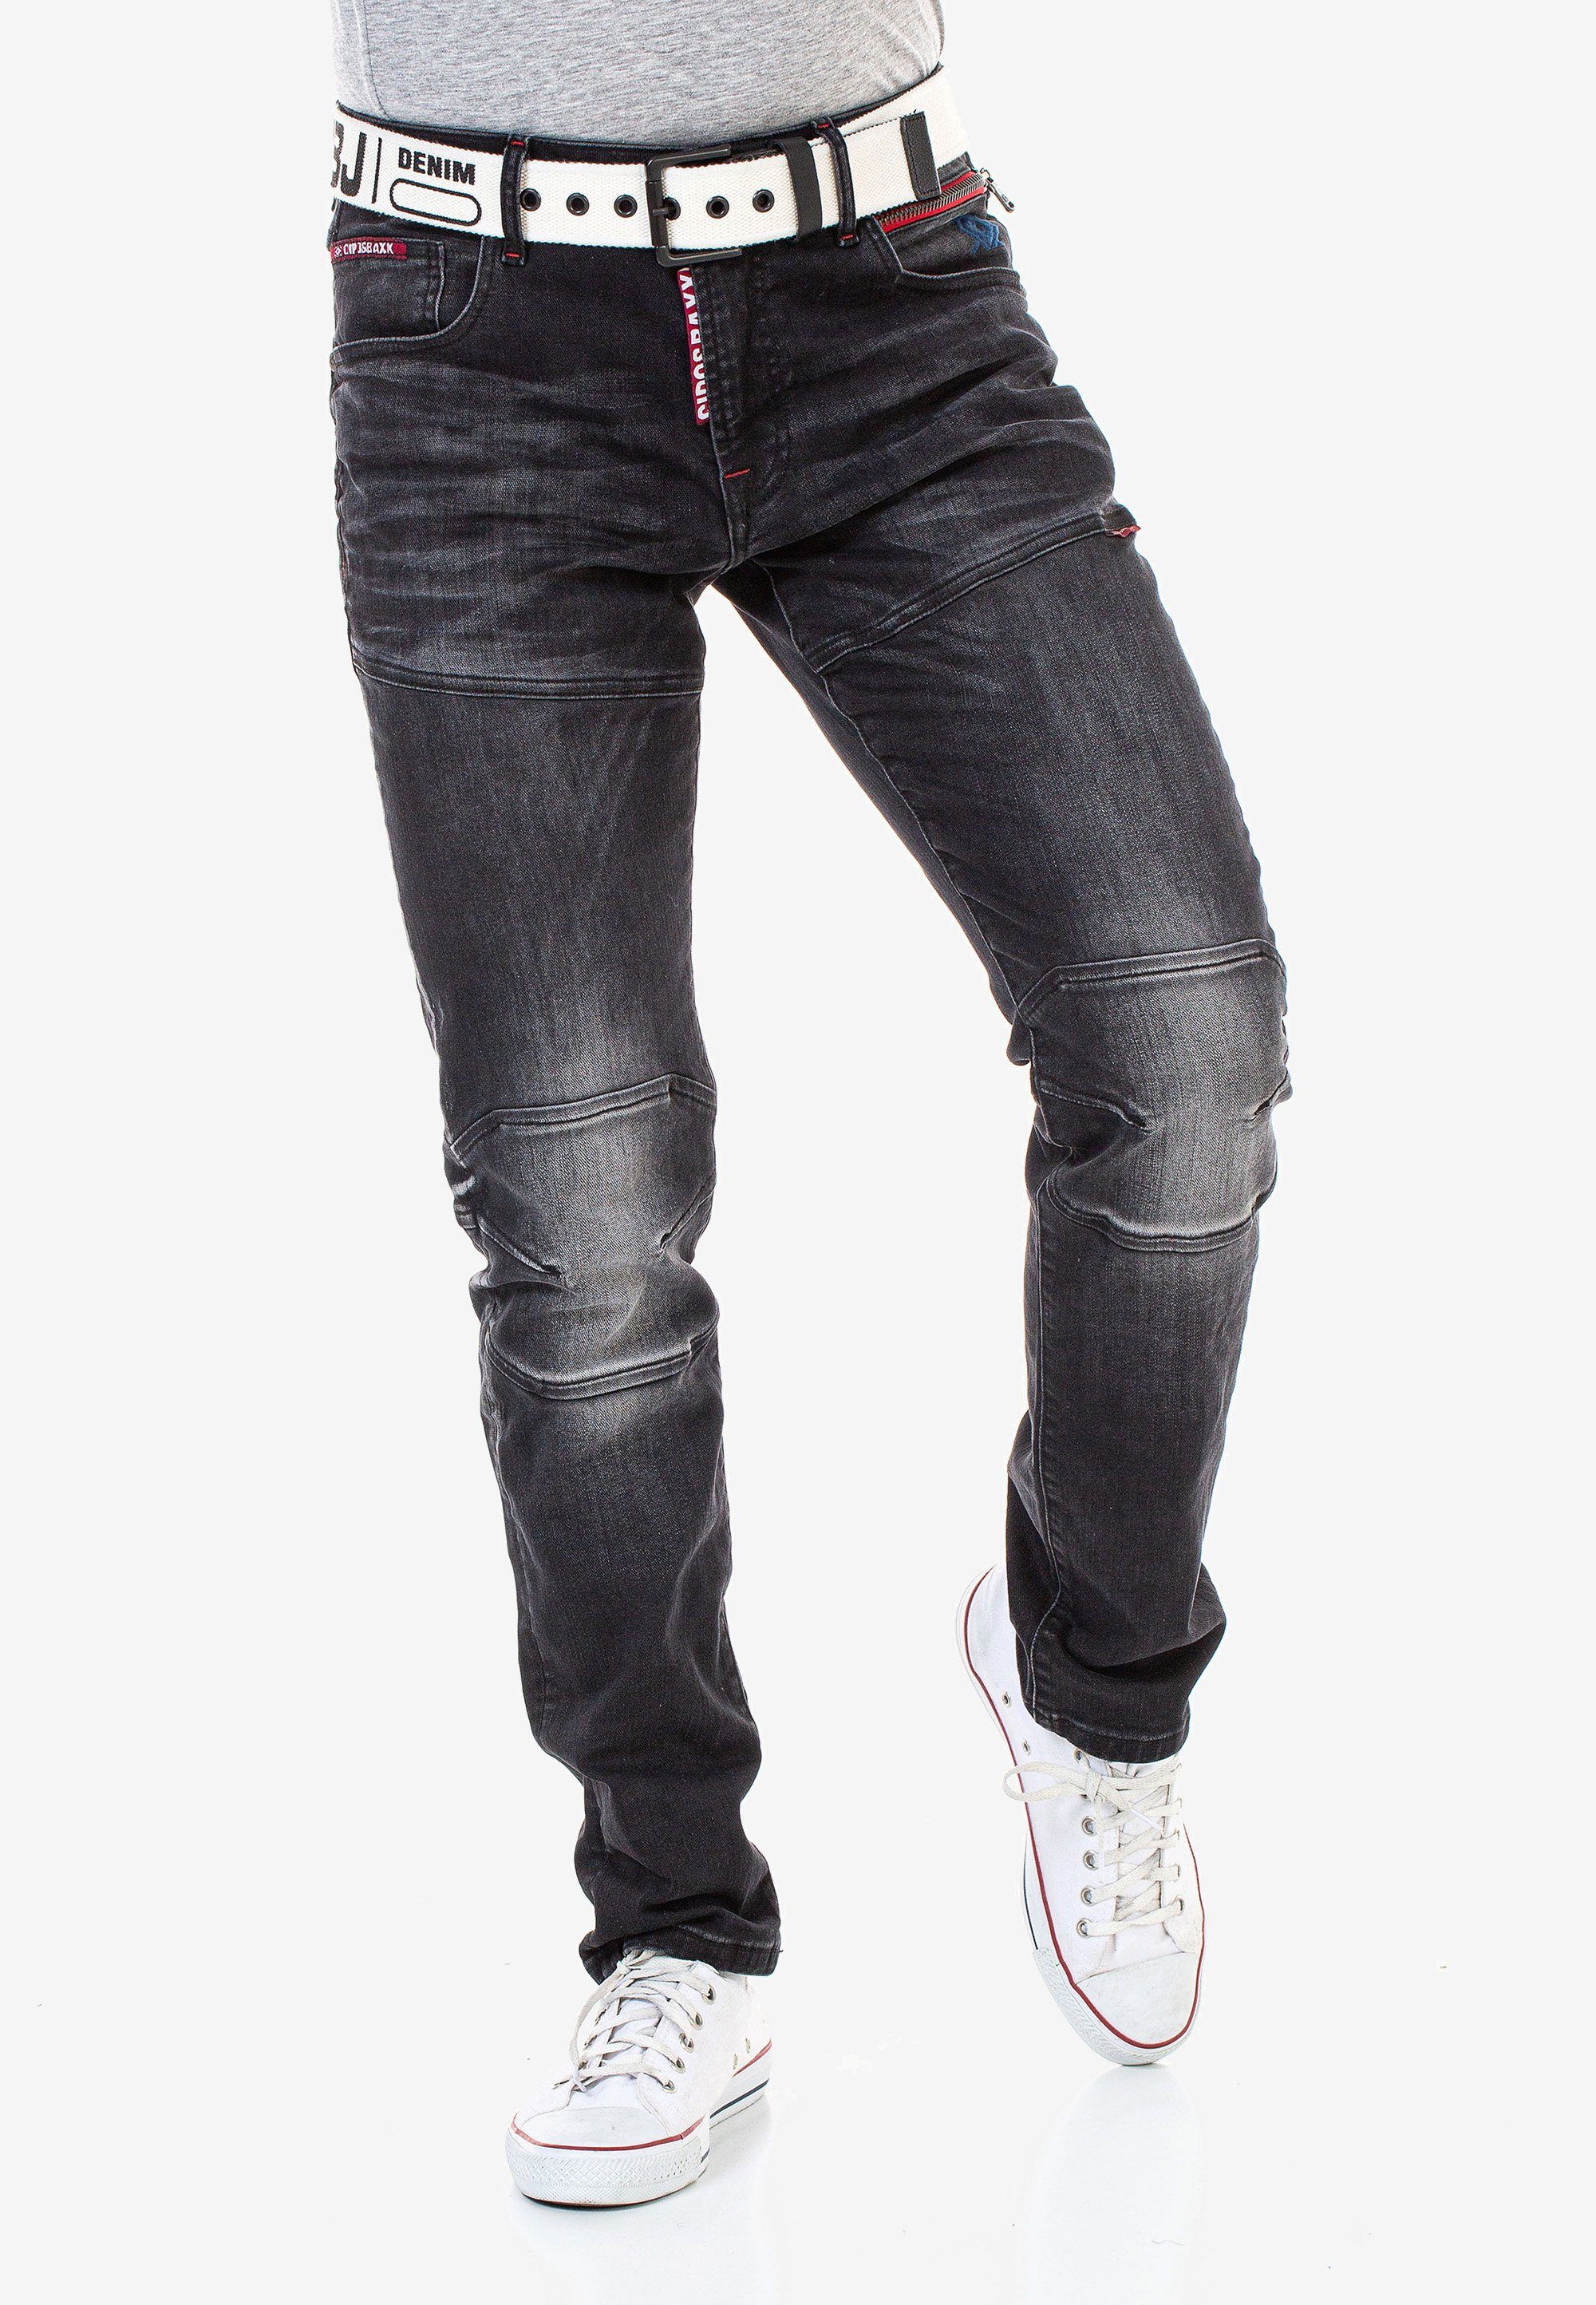 & Cipo Straight-Jeans mit Baxx cooler Used-Waschung